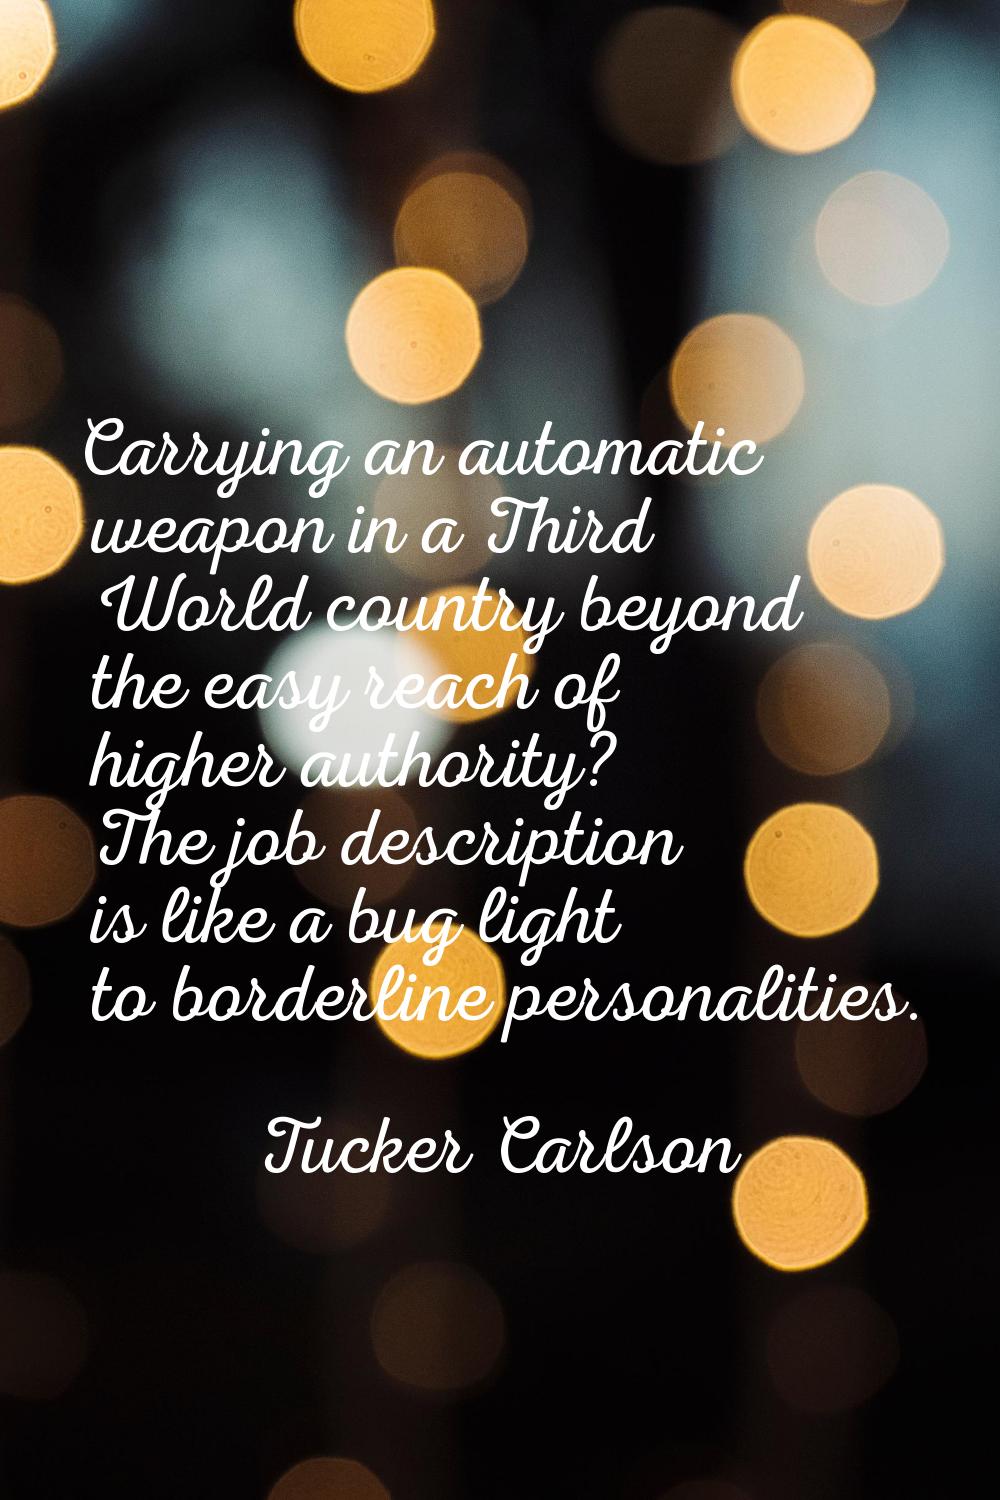 Carrying an automatic weapon in a Third World country beyond the easy reach of higher authority? Th